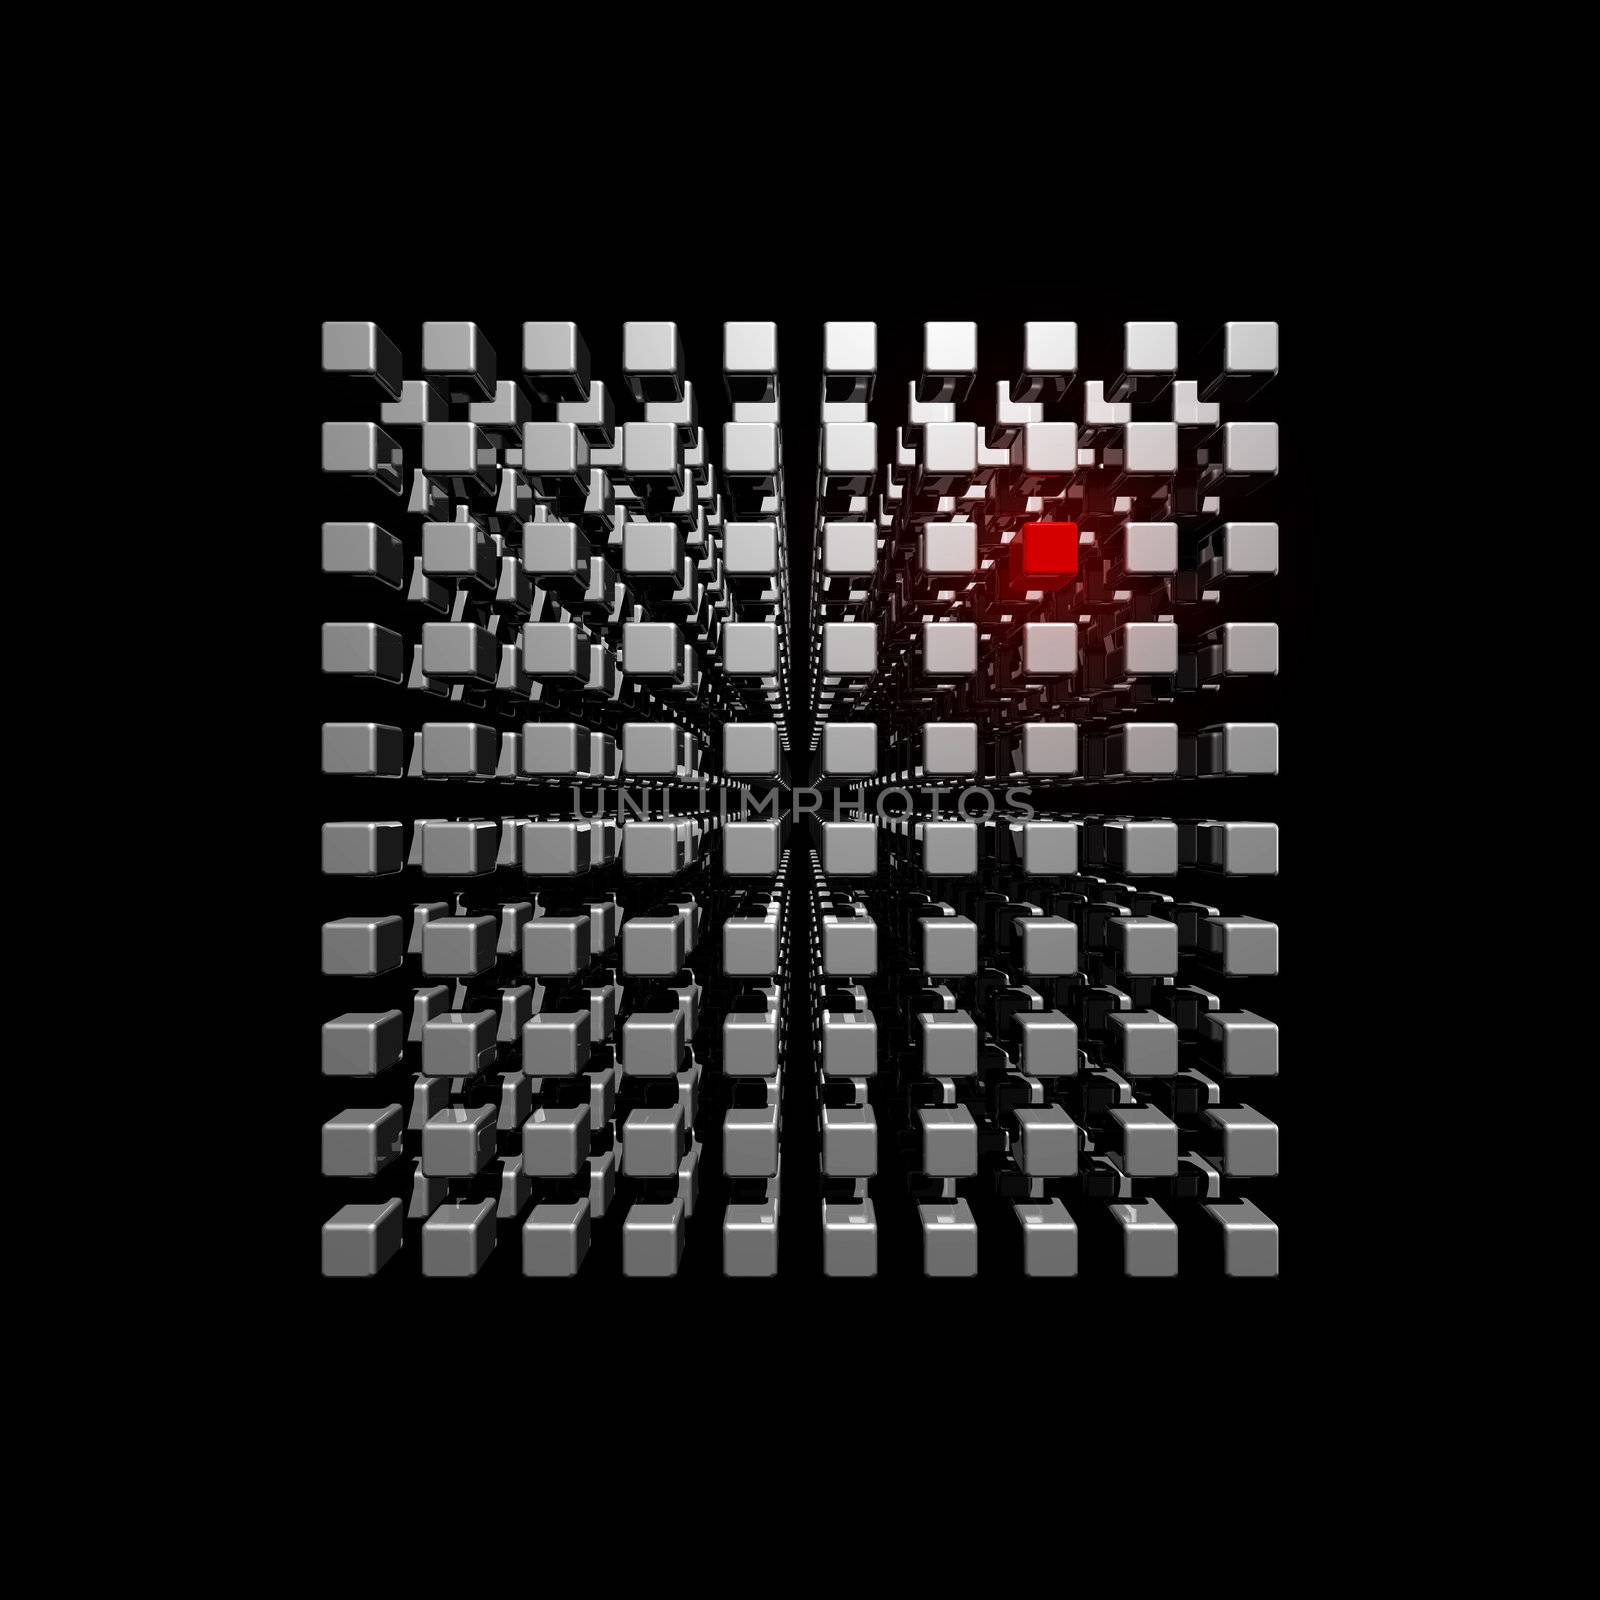 Isolated three dimensional cube made of metal cubes whith a red selected point